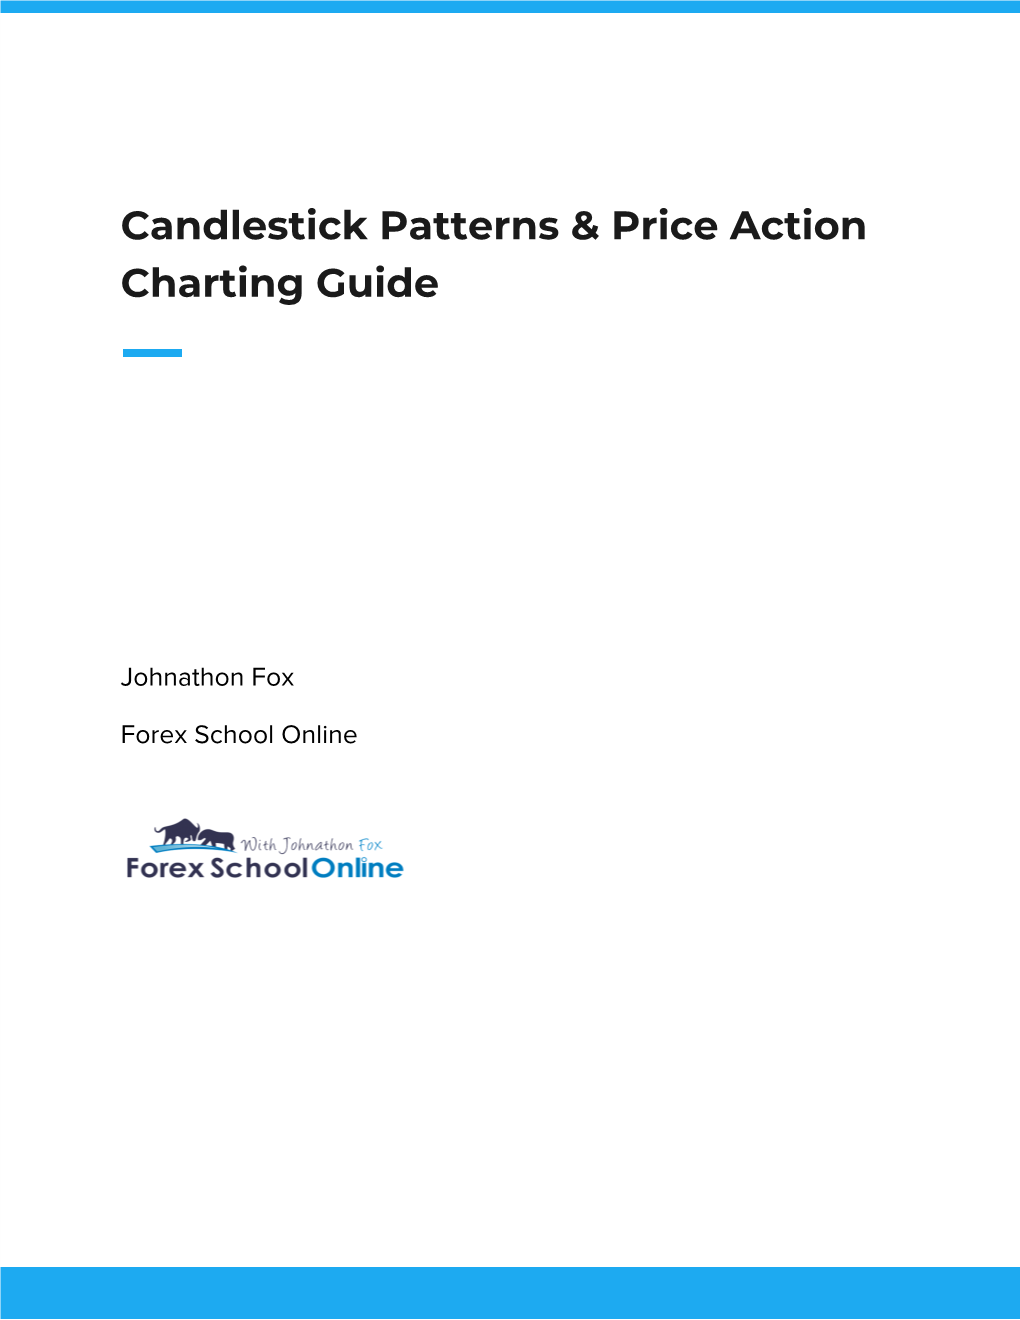 Candlestick Patterns & Price Action Charting Guide